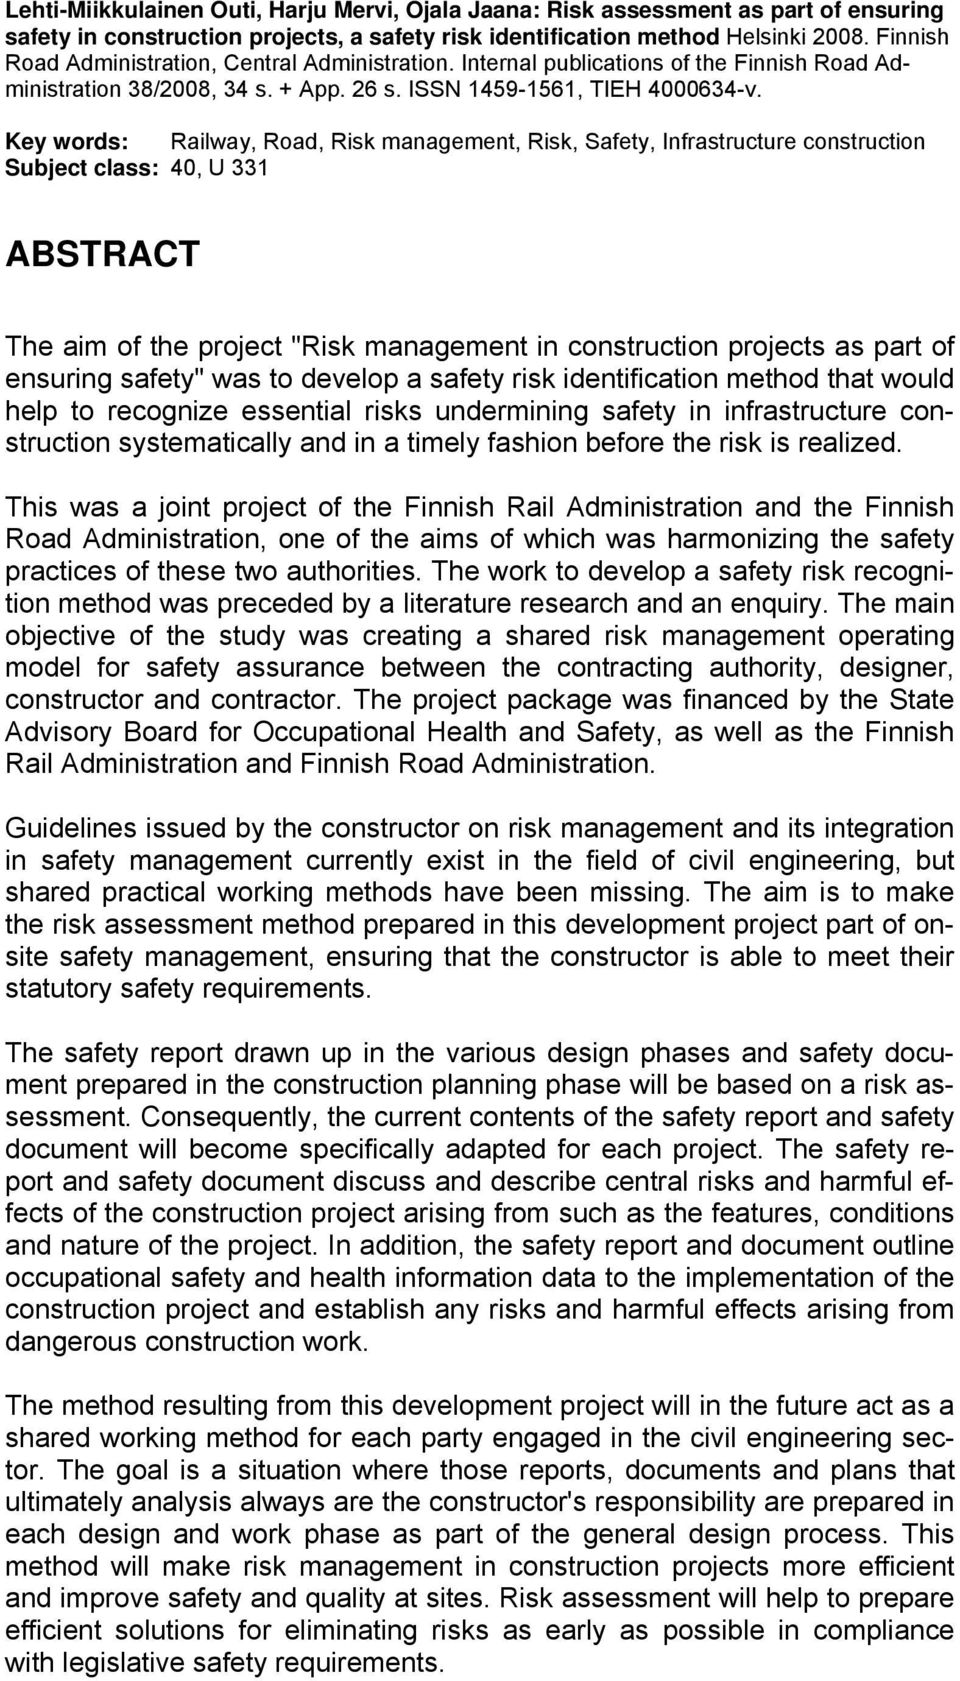 Key words: Railway, Road, Risk management, Risk, Safety, Infrastructure construction Subject class: 40, U 331 ABSTRACT The aim of the project "Risk management in construction projects as part of